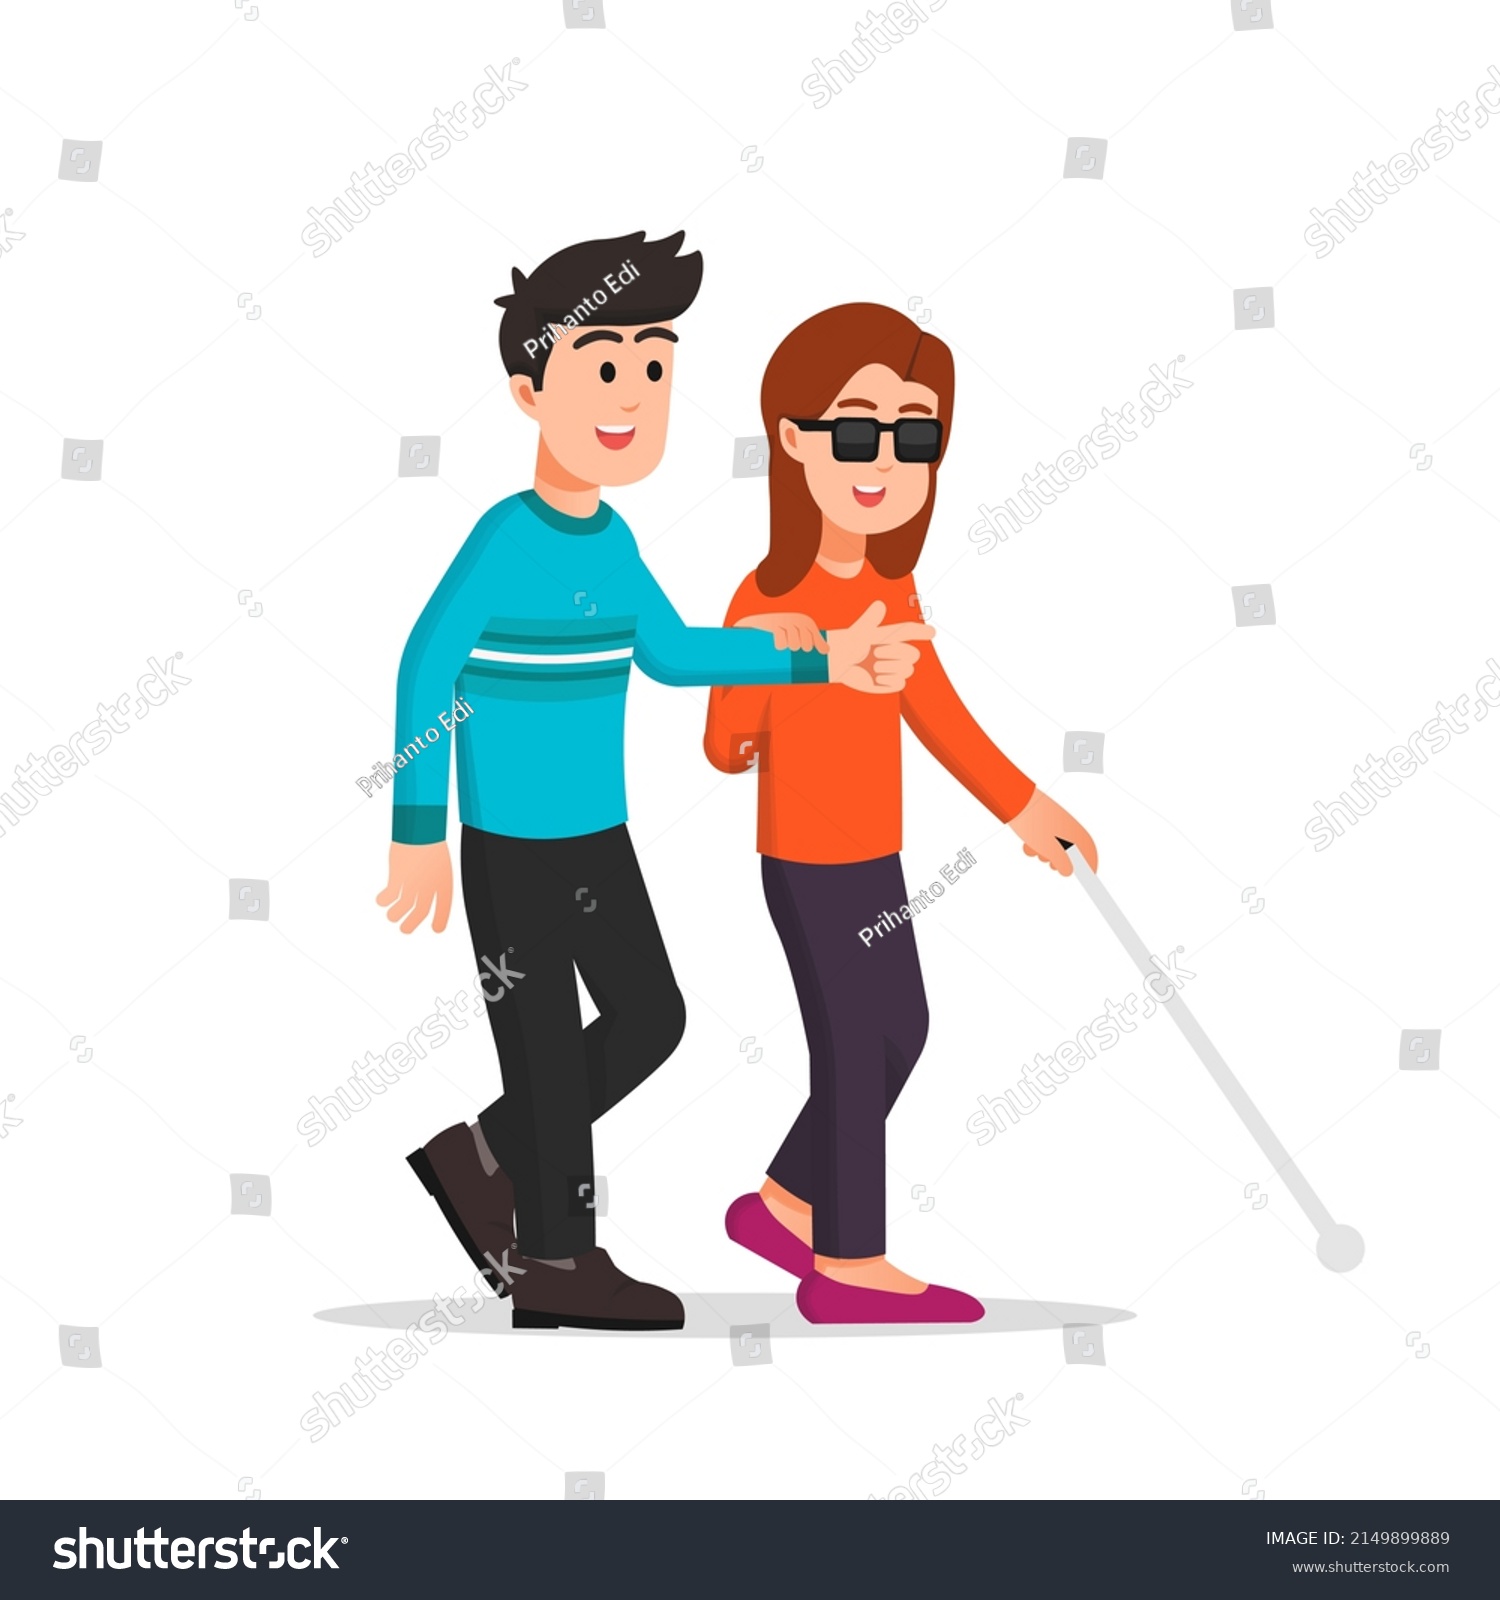 SVG of a good man is leading a blind woman svg